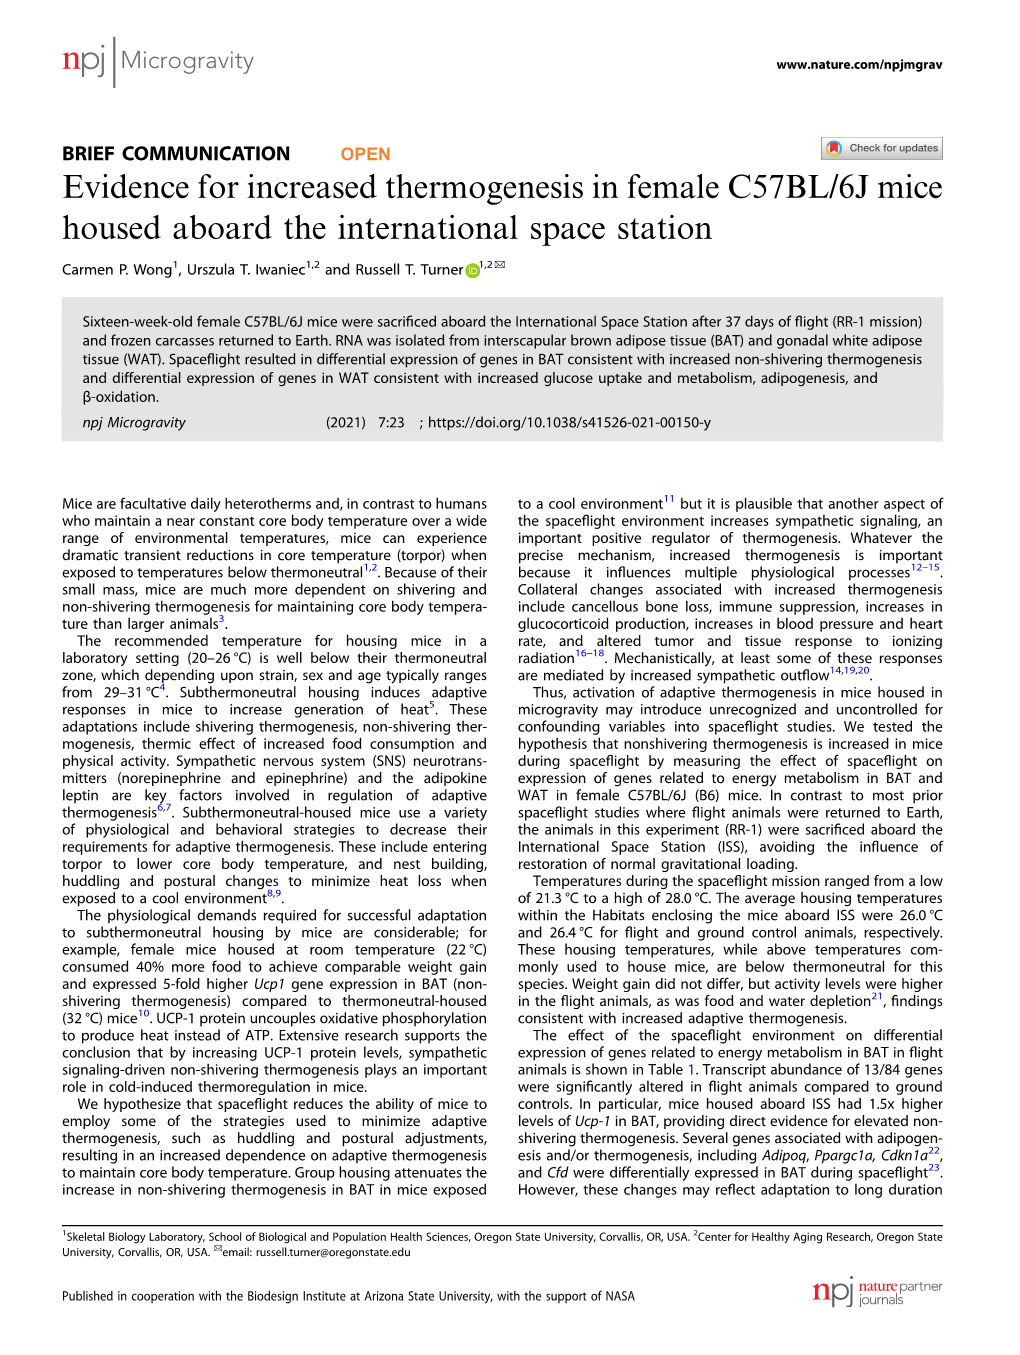 Evidence for Increased Thermogenesis in Female C57BL/6J Mice Housed Aboard the International Space Station ✉ Carmen P